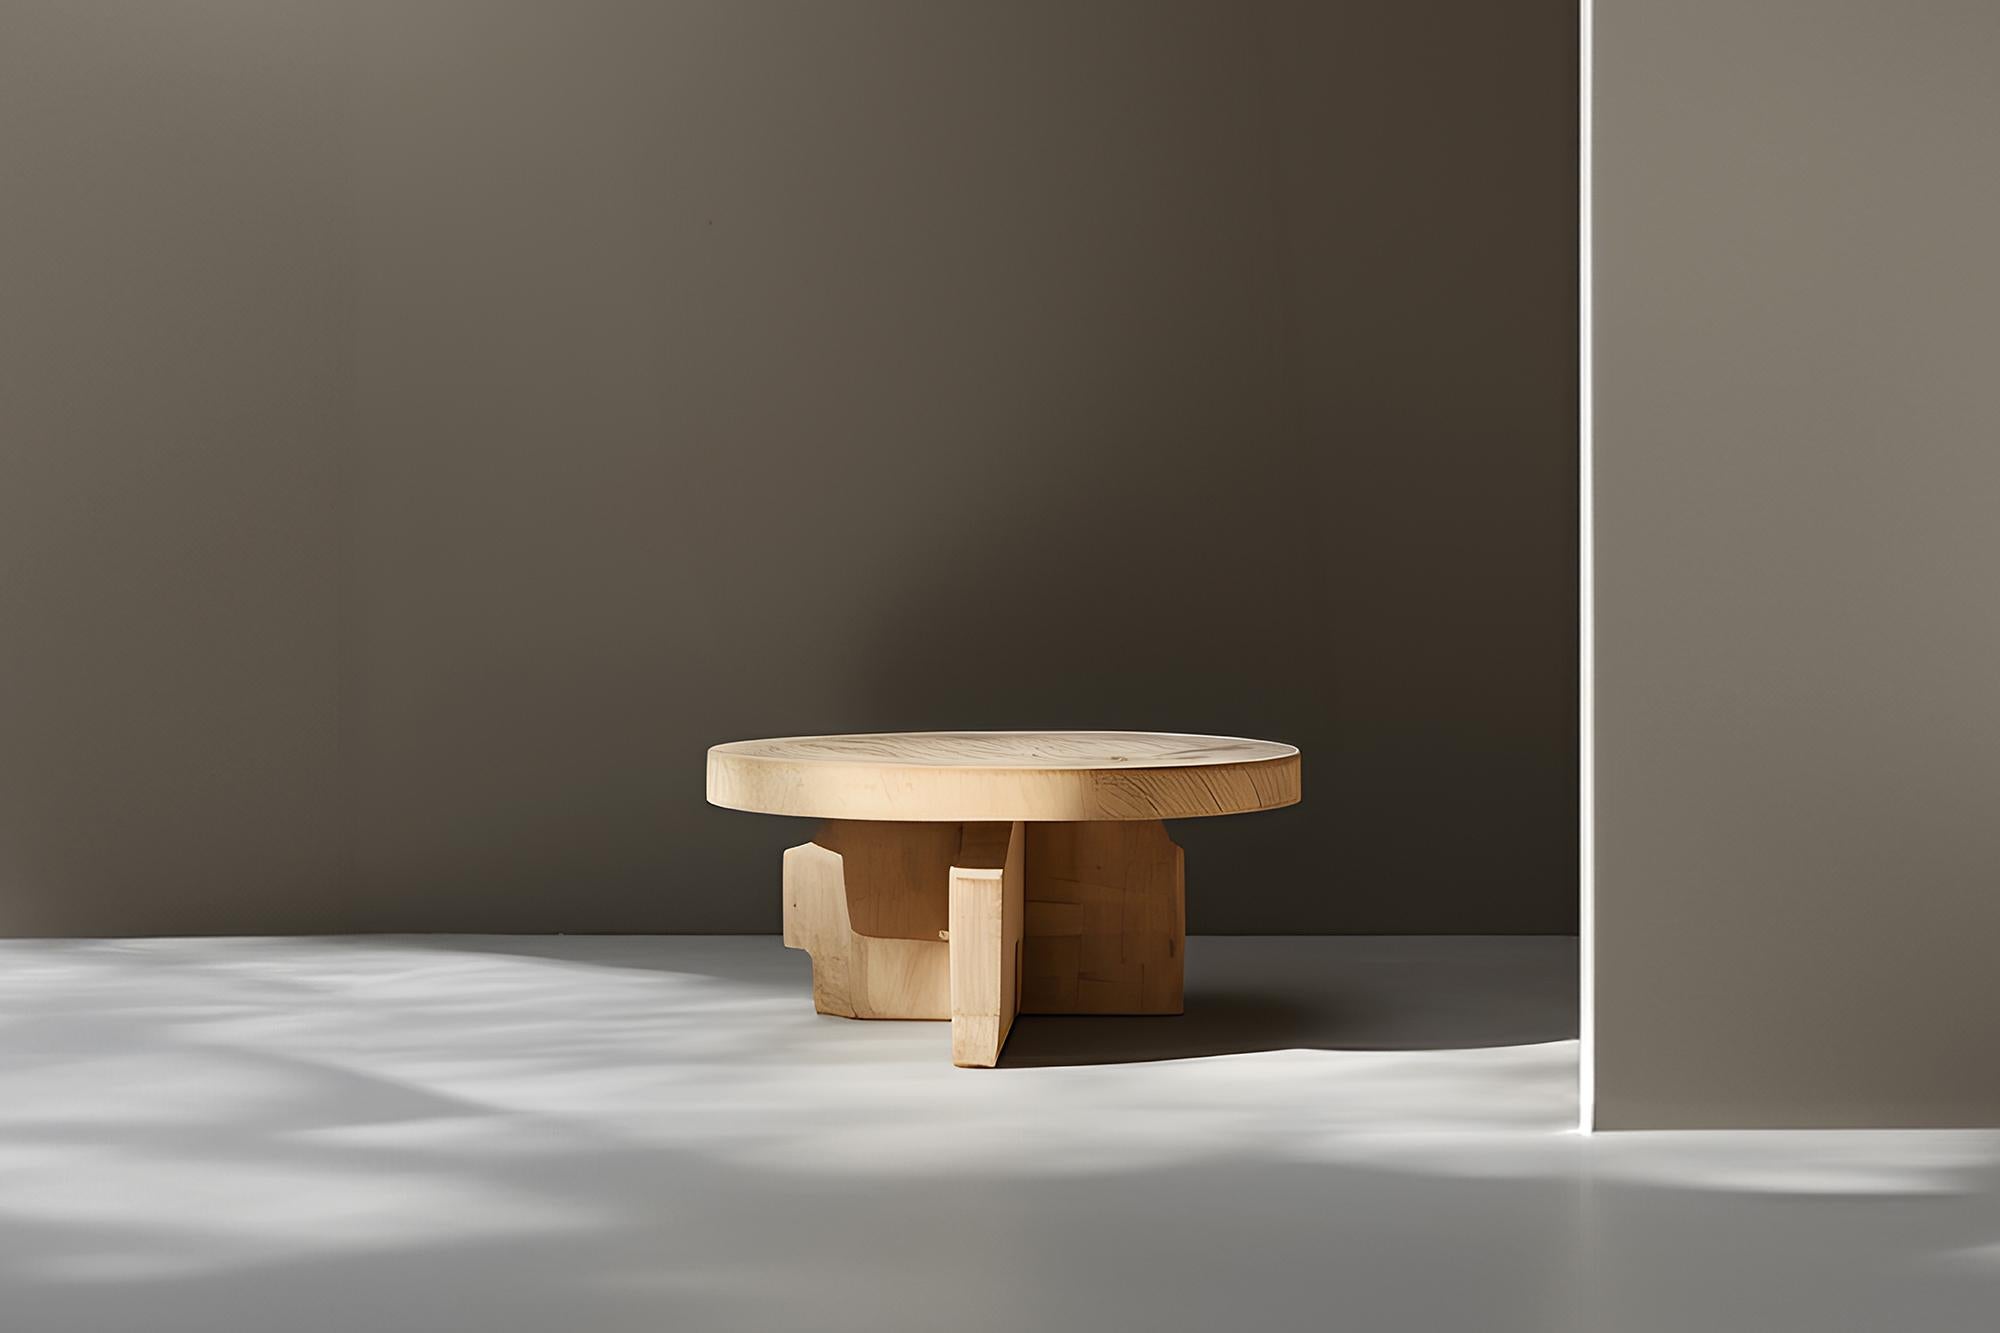 Oak Abstract Round Fundamenta 66 Sleek Lines, Solid Craft by NONO

Sculptural coffee table made of solid wood with a natural water-based or black tinted finish. Due to the nature of the production process, each piece may vary in grain, texture,